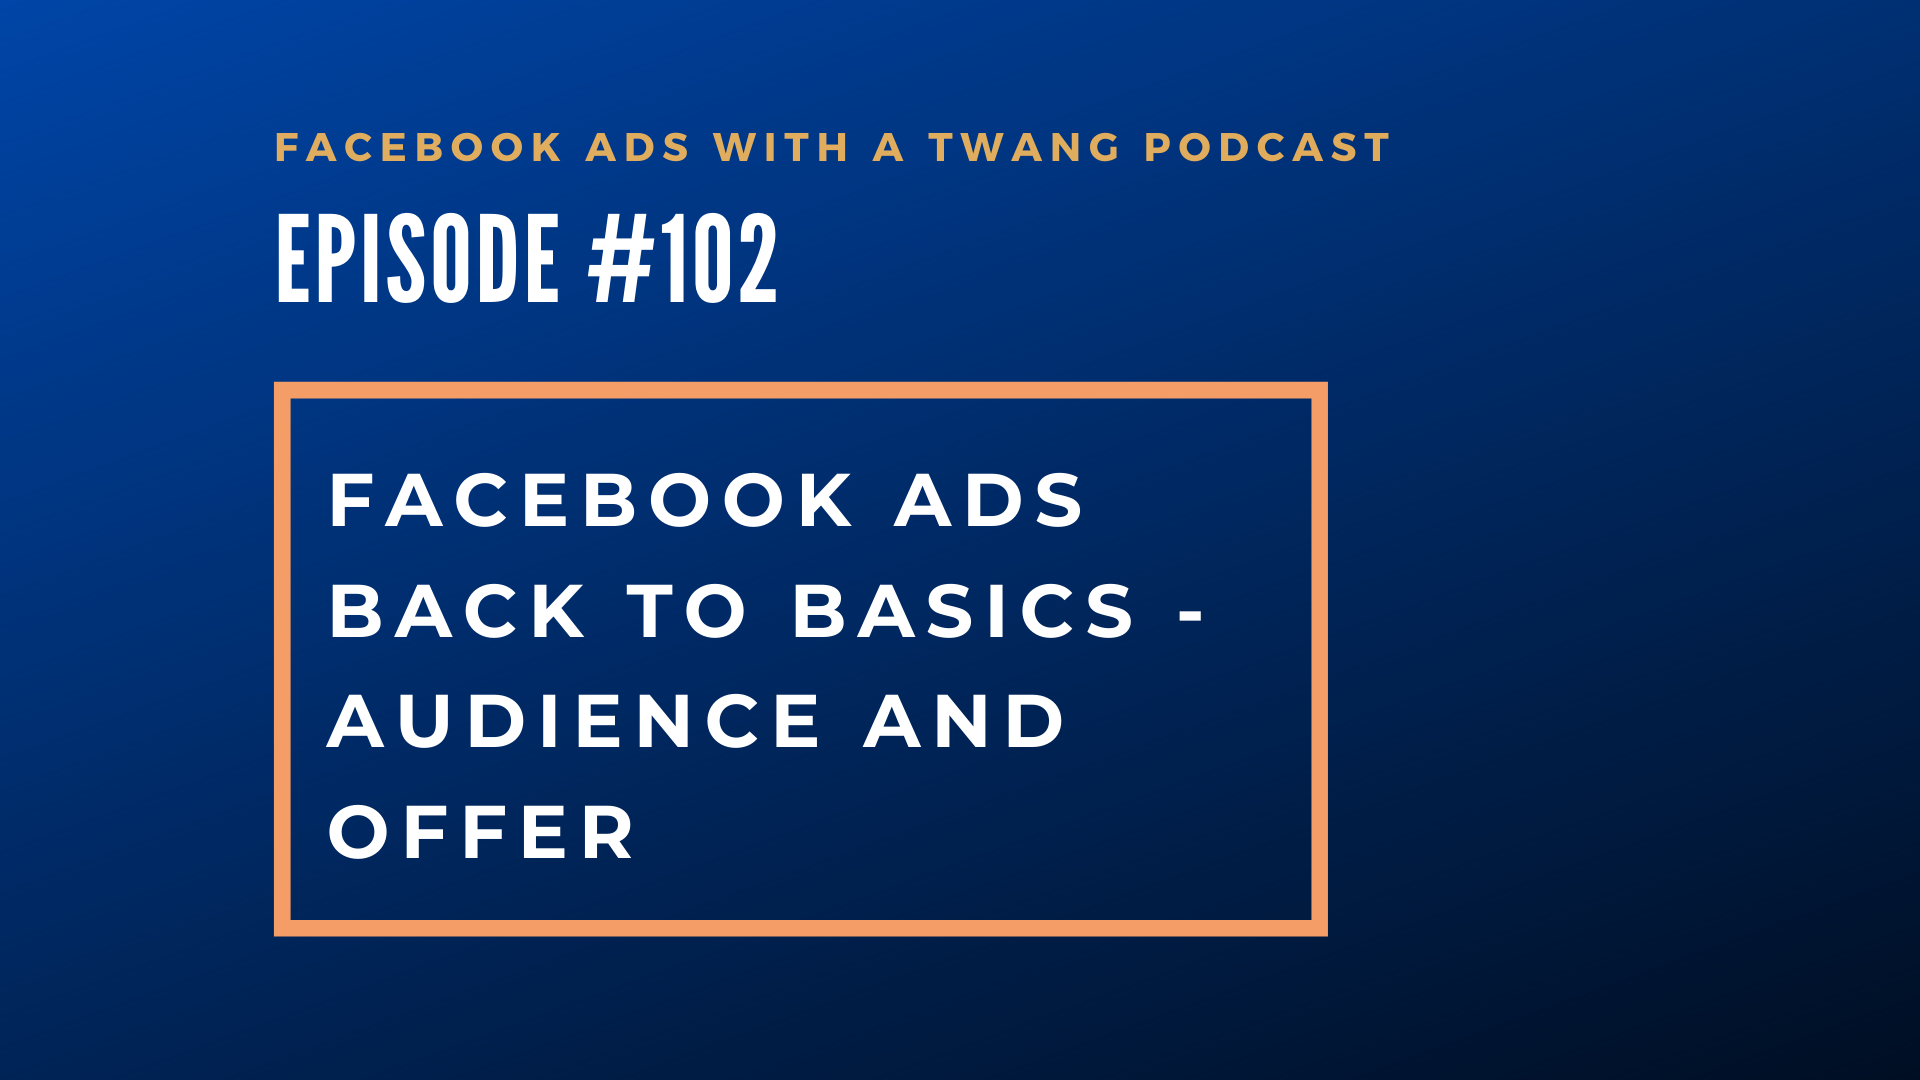 Episode #102 – Facebook ads back to basics – audience and offer